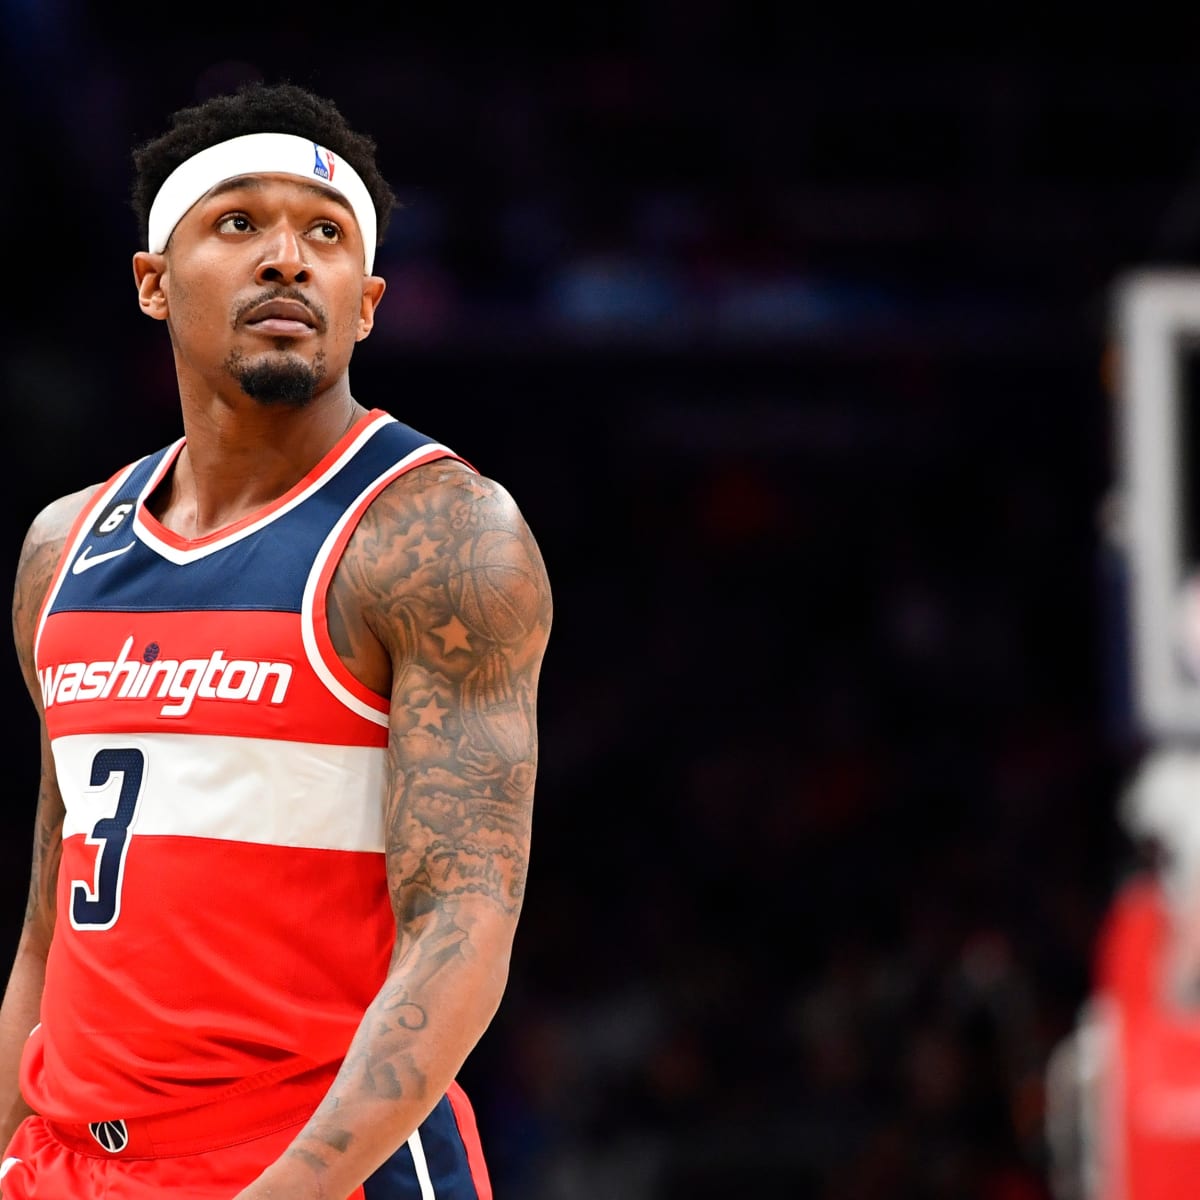 Miami Heat: Bradley Beal not signing extension with Wizards (yet)